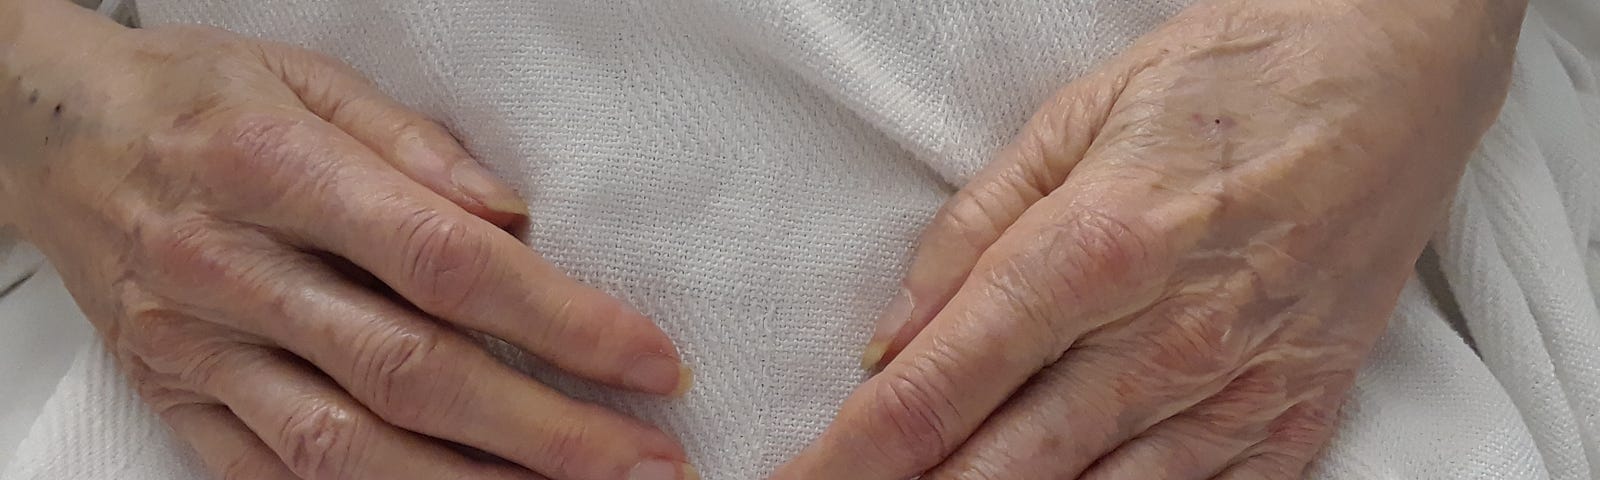 hands of an older woman, on her own stomach and lap.